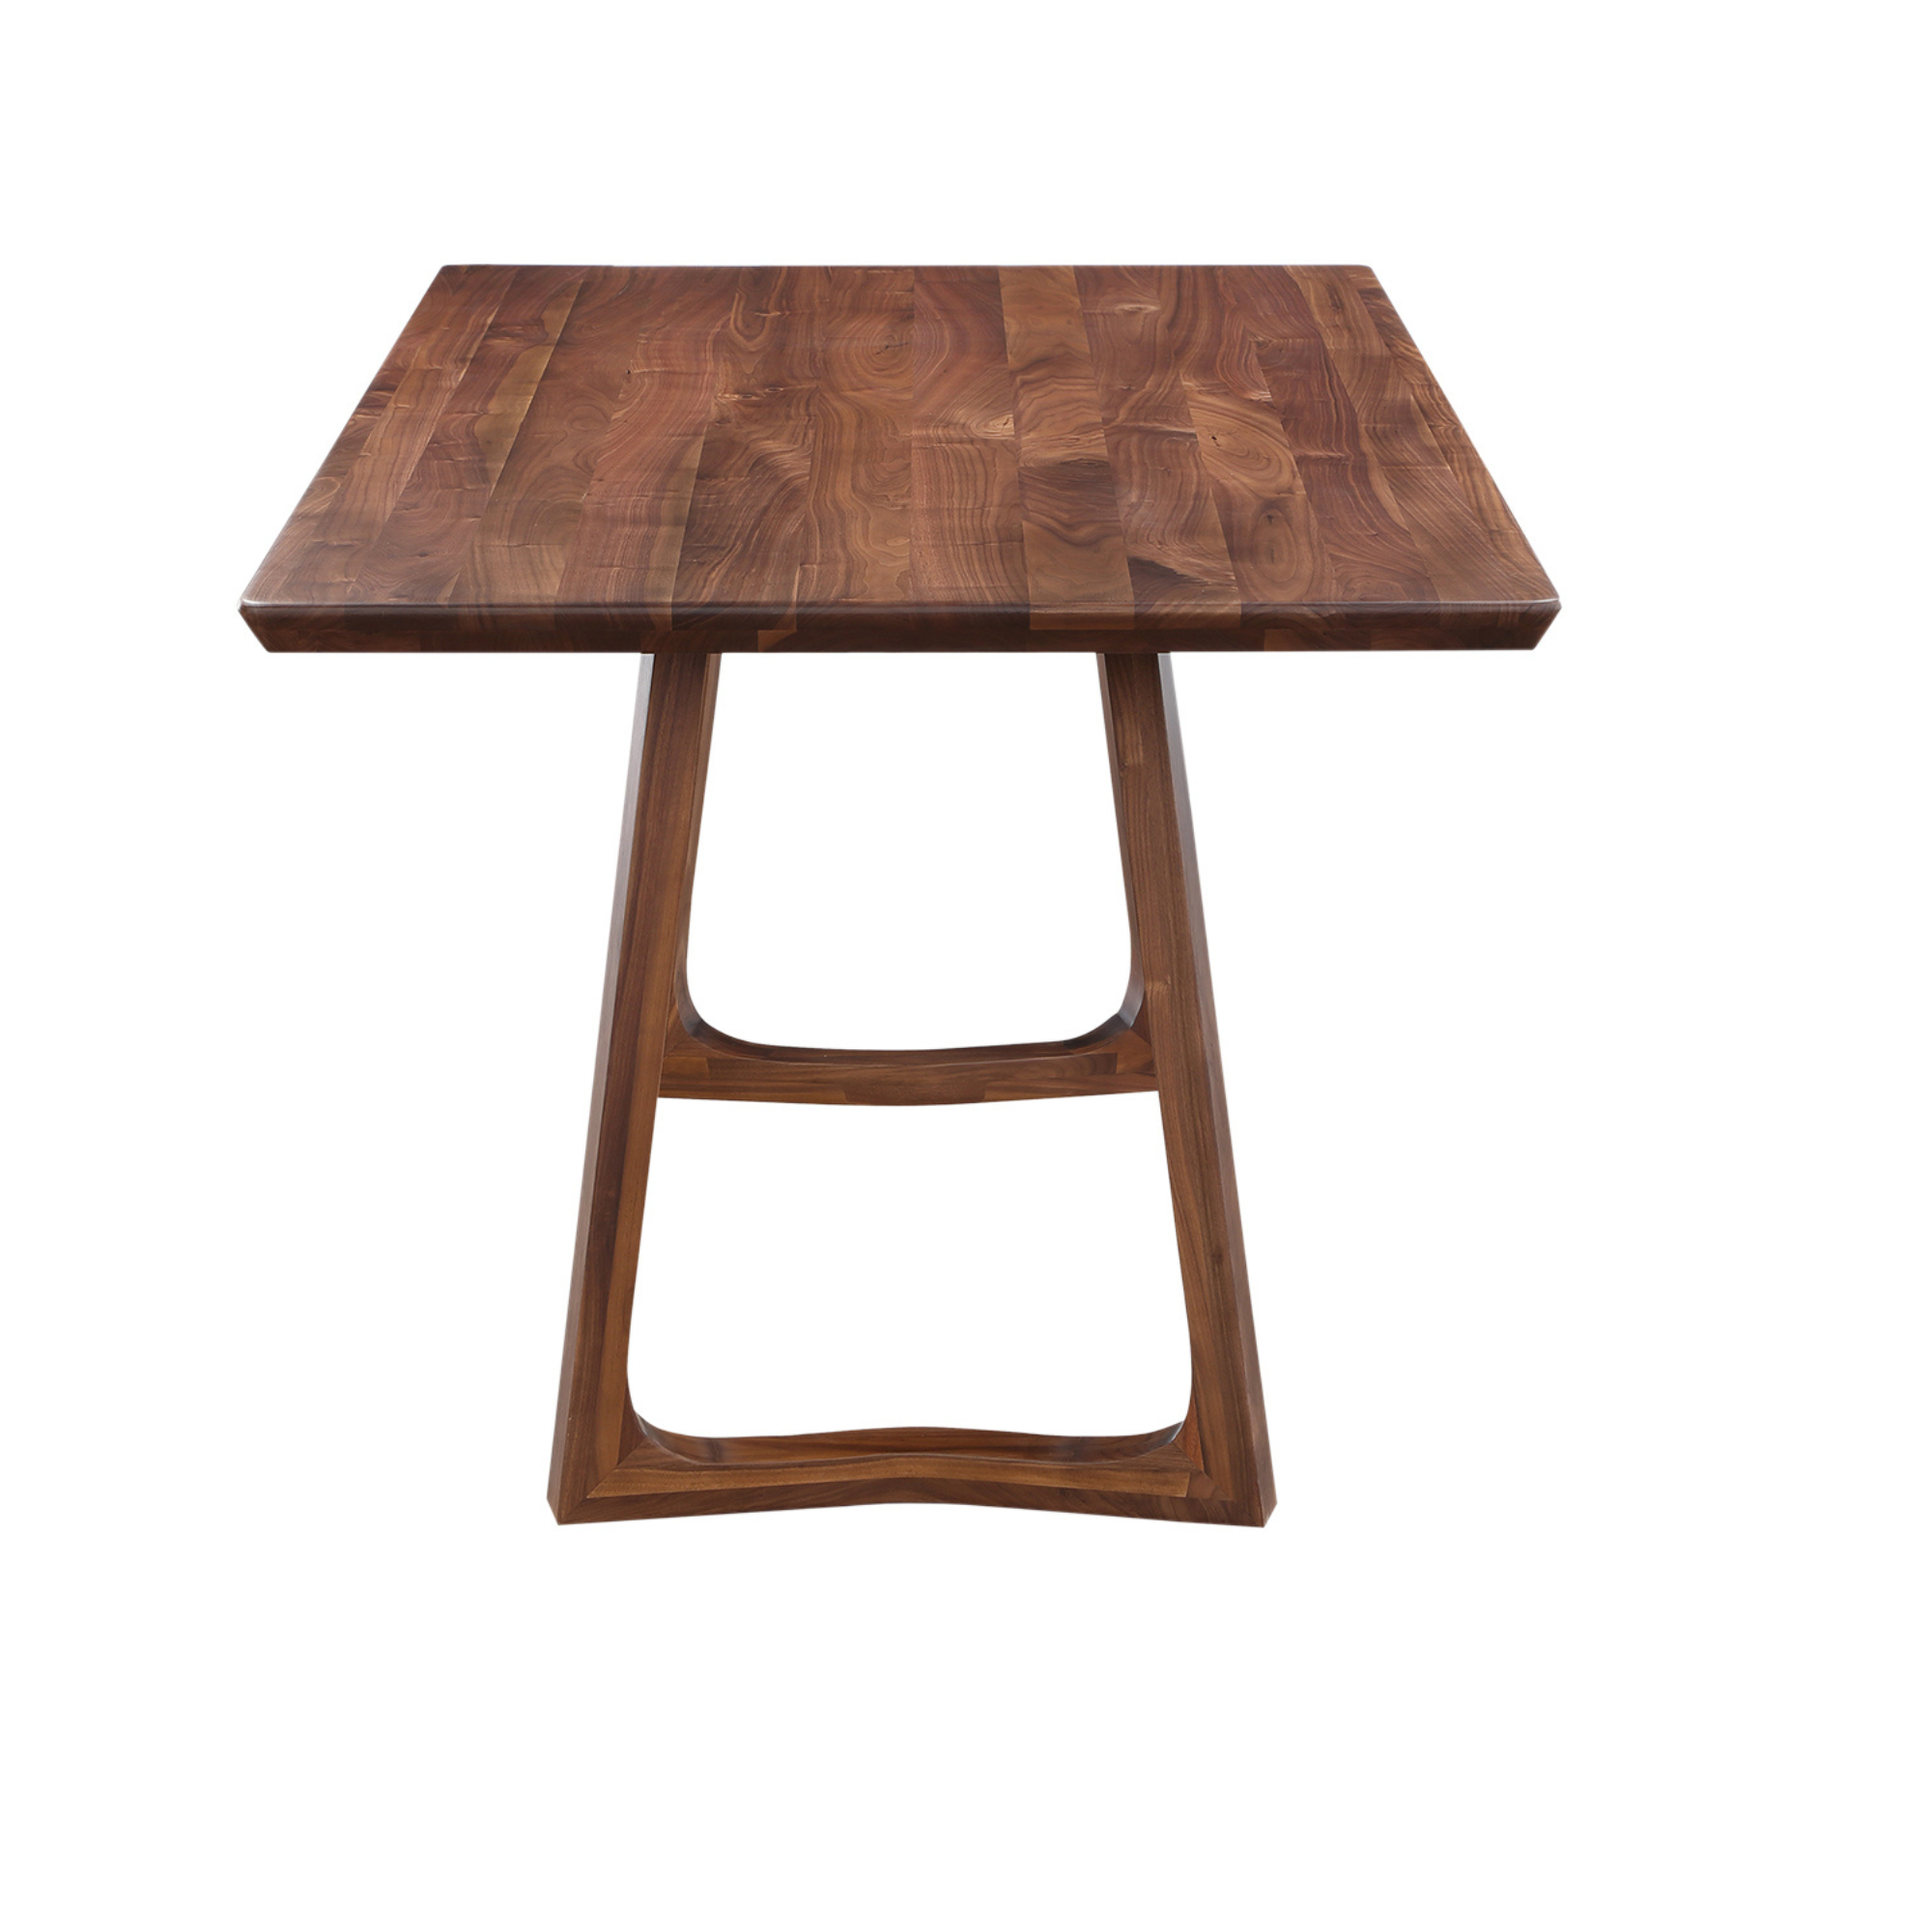 Silas Dining Table